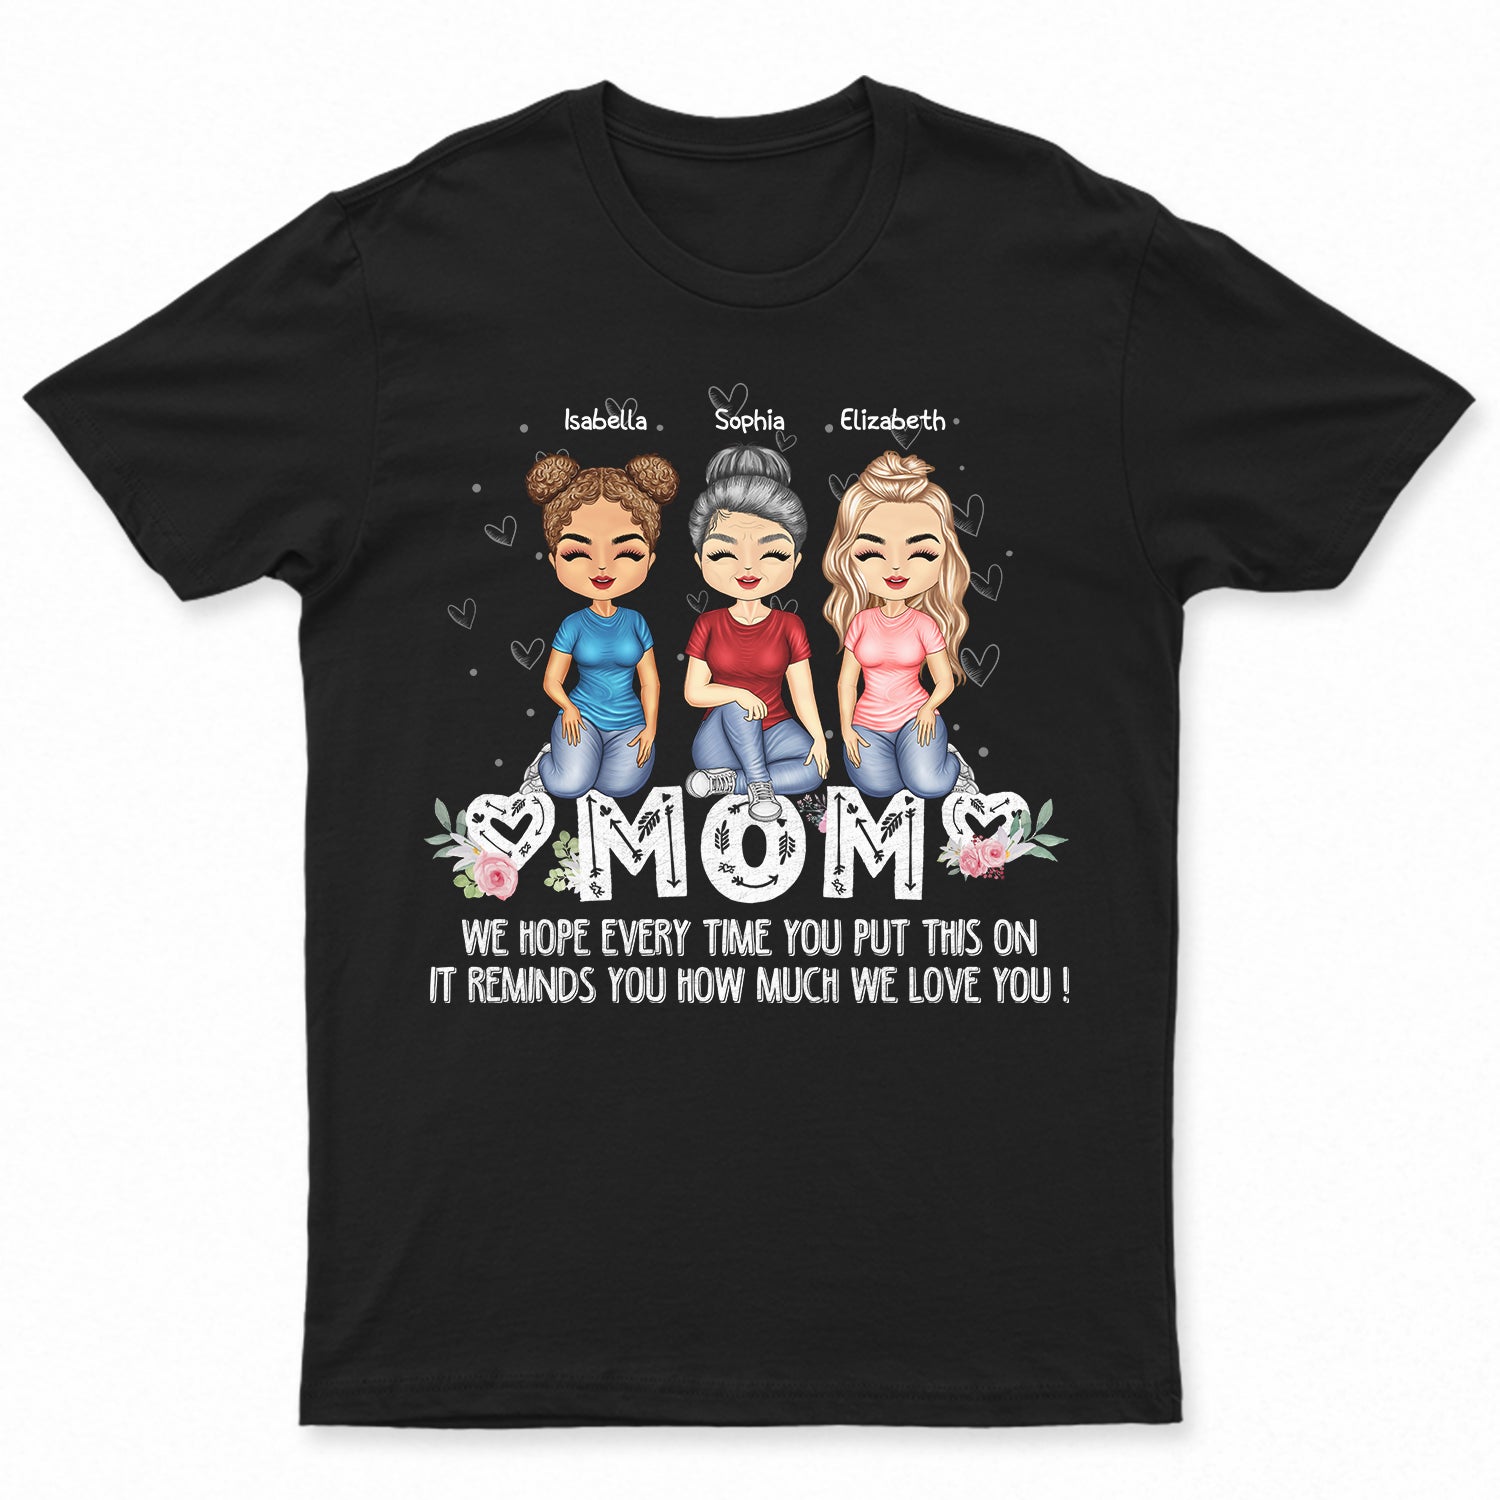 We Hope Every Time You Put This On - Birthday, Loving Gift For Mom, Mother, Grandma, Grandmother - Personalized Custom T Shirt